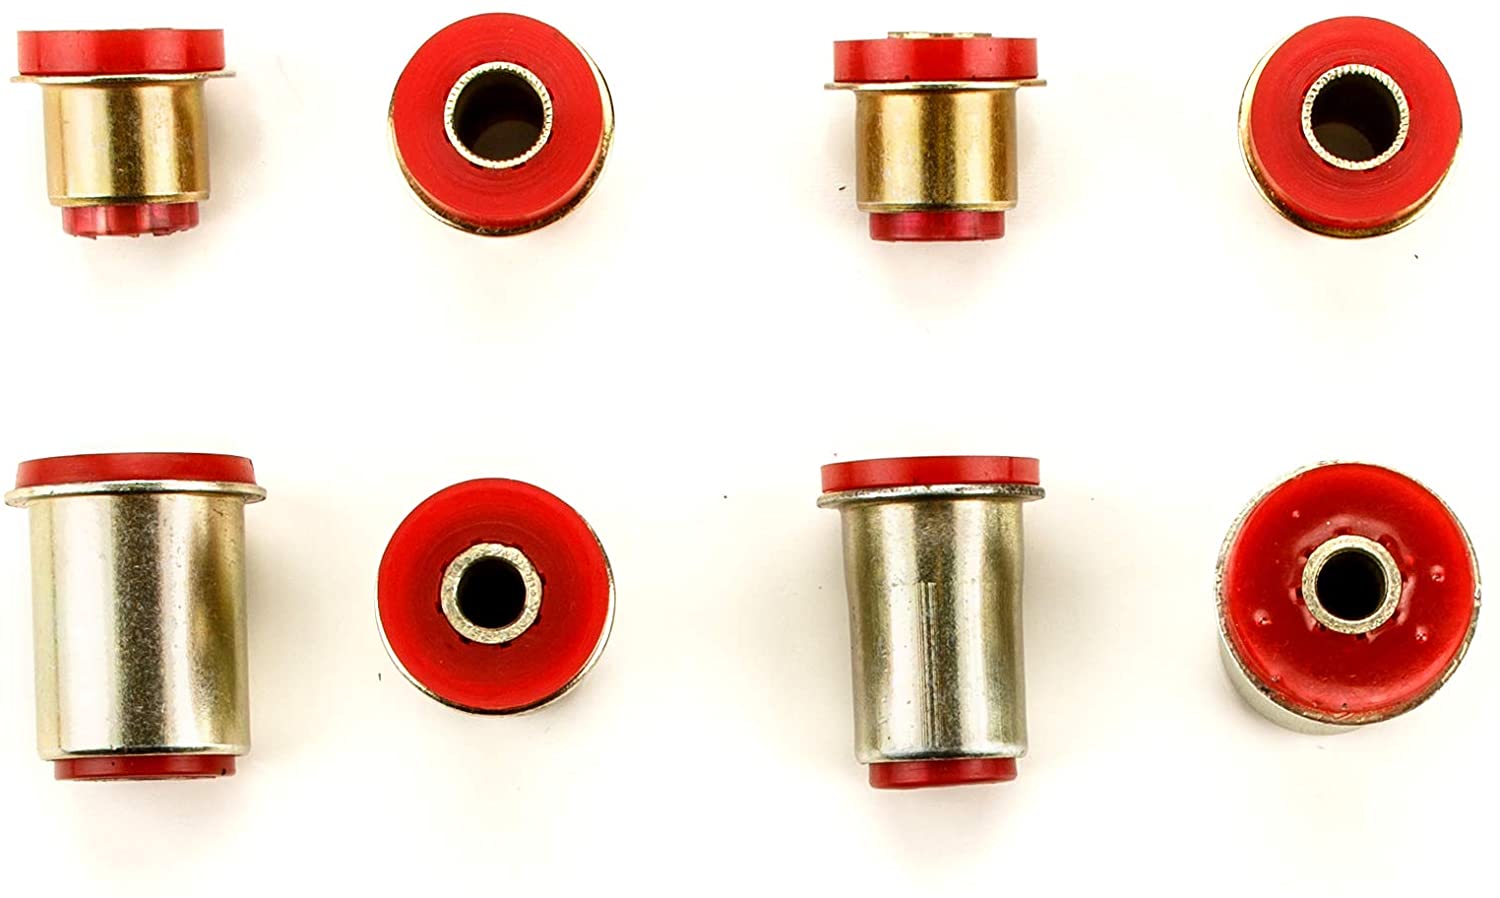 Andersen Restorations Red Polyurethane Control Arm Bushings Set Compatible with Chevrolet Chevelle OEM Spec Replacements (8 Piece Kit)